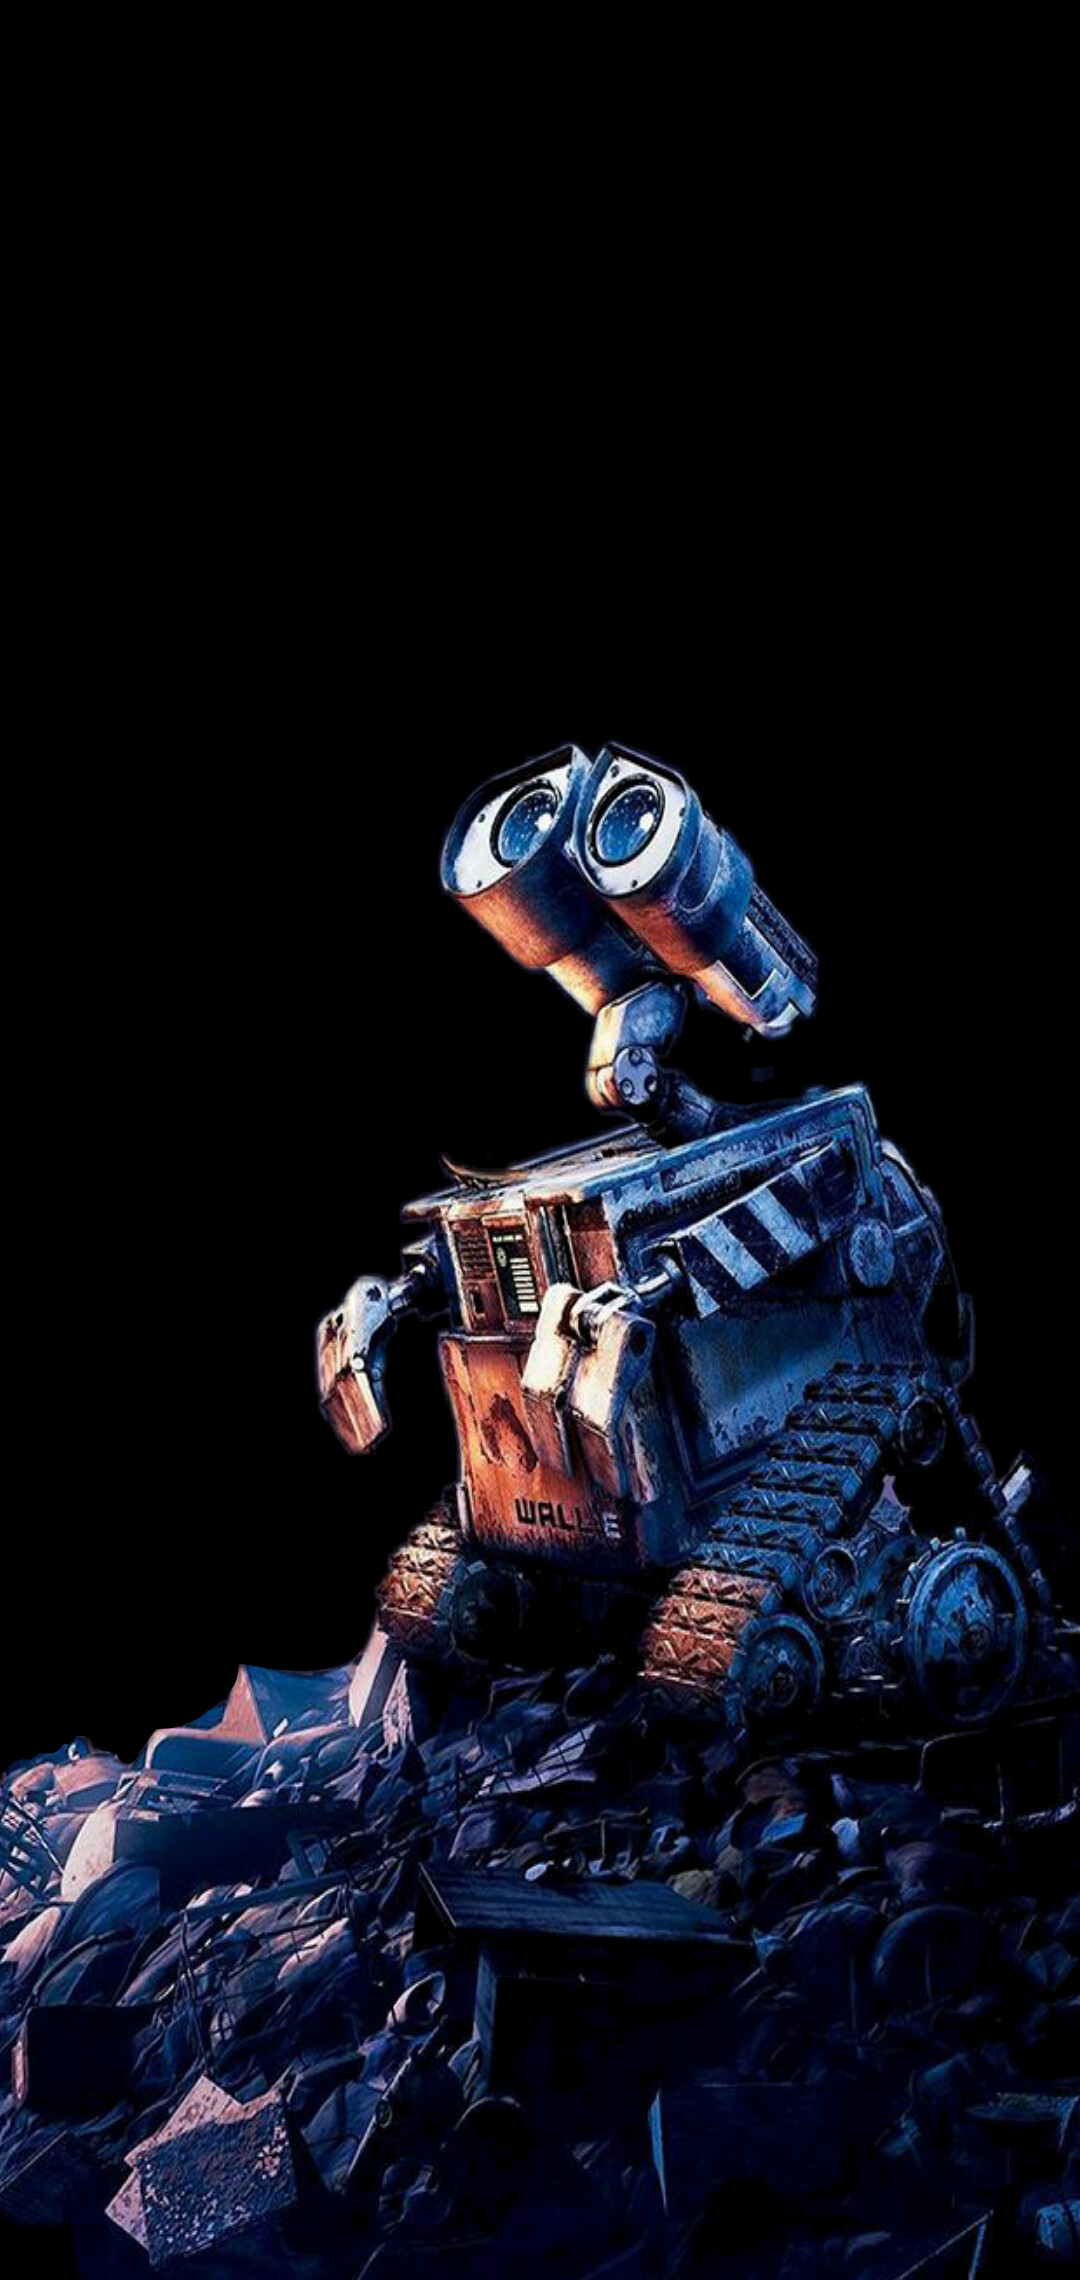 WALL·E: It’s the twenty-ninth century, and humans have long since fled Earth for outer space, leaving the last functioning trash-compacting robot, to go about the work of cleaning up a pollution-choked planet. 1080x2280 HD Wallpaper.